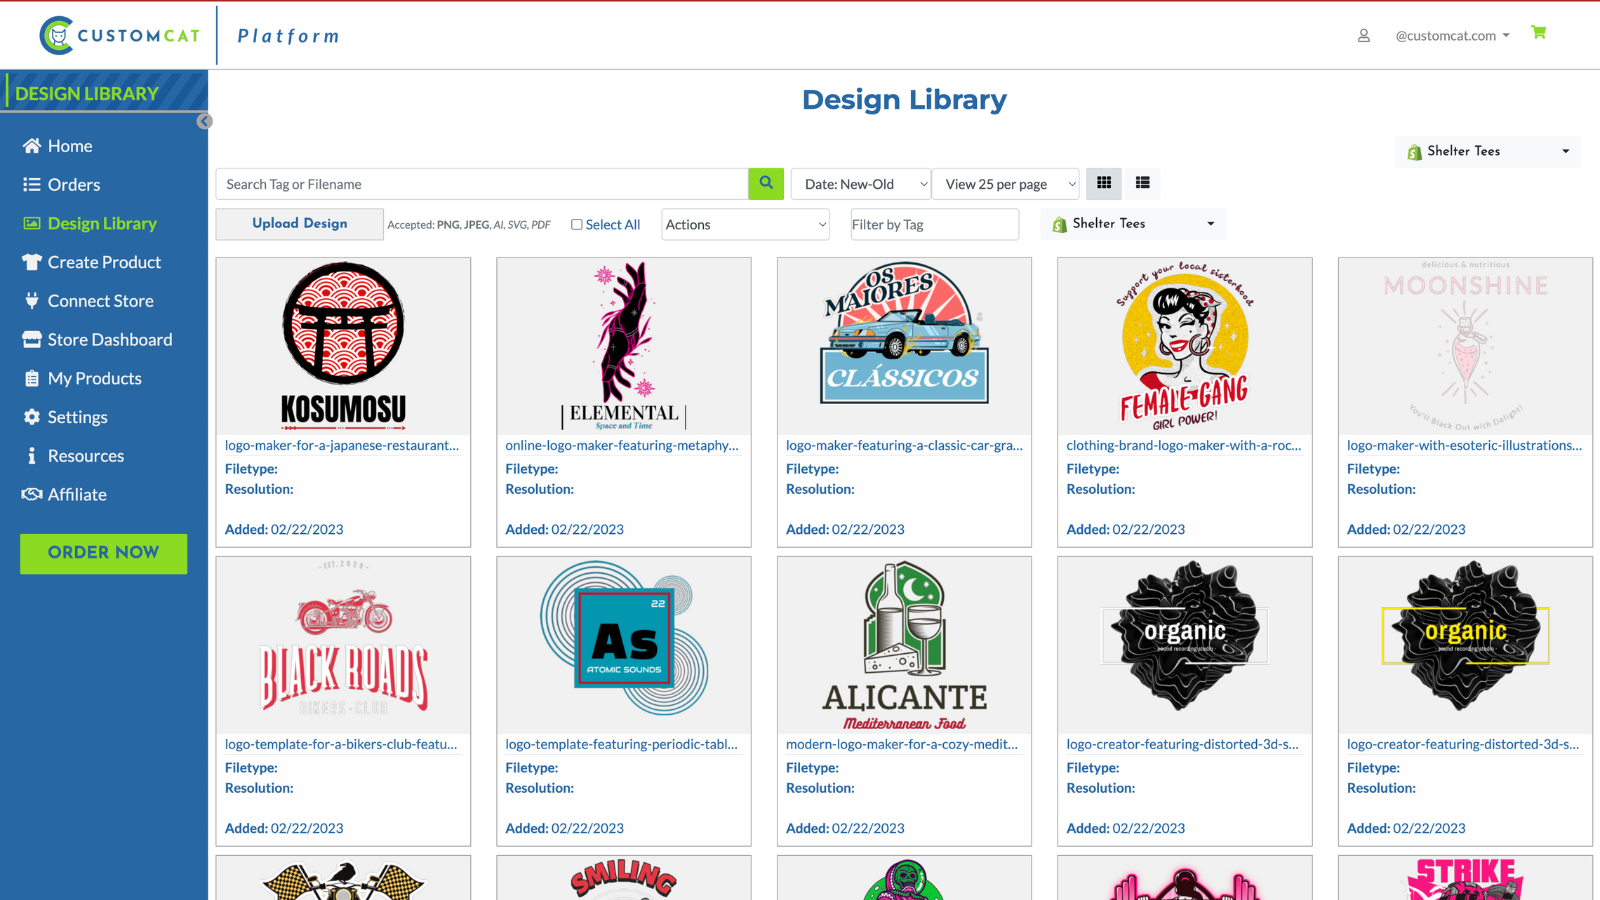 Upload and Manage Designs in the Design Library